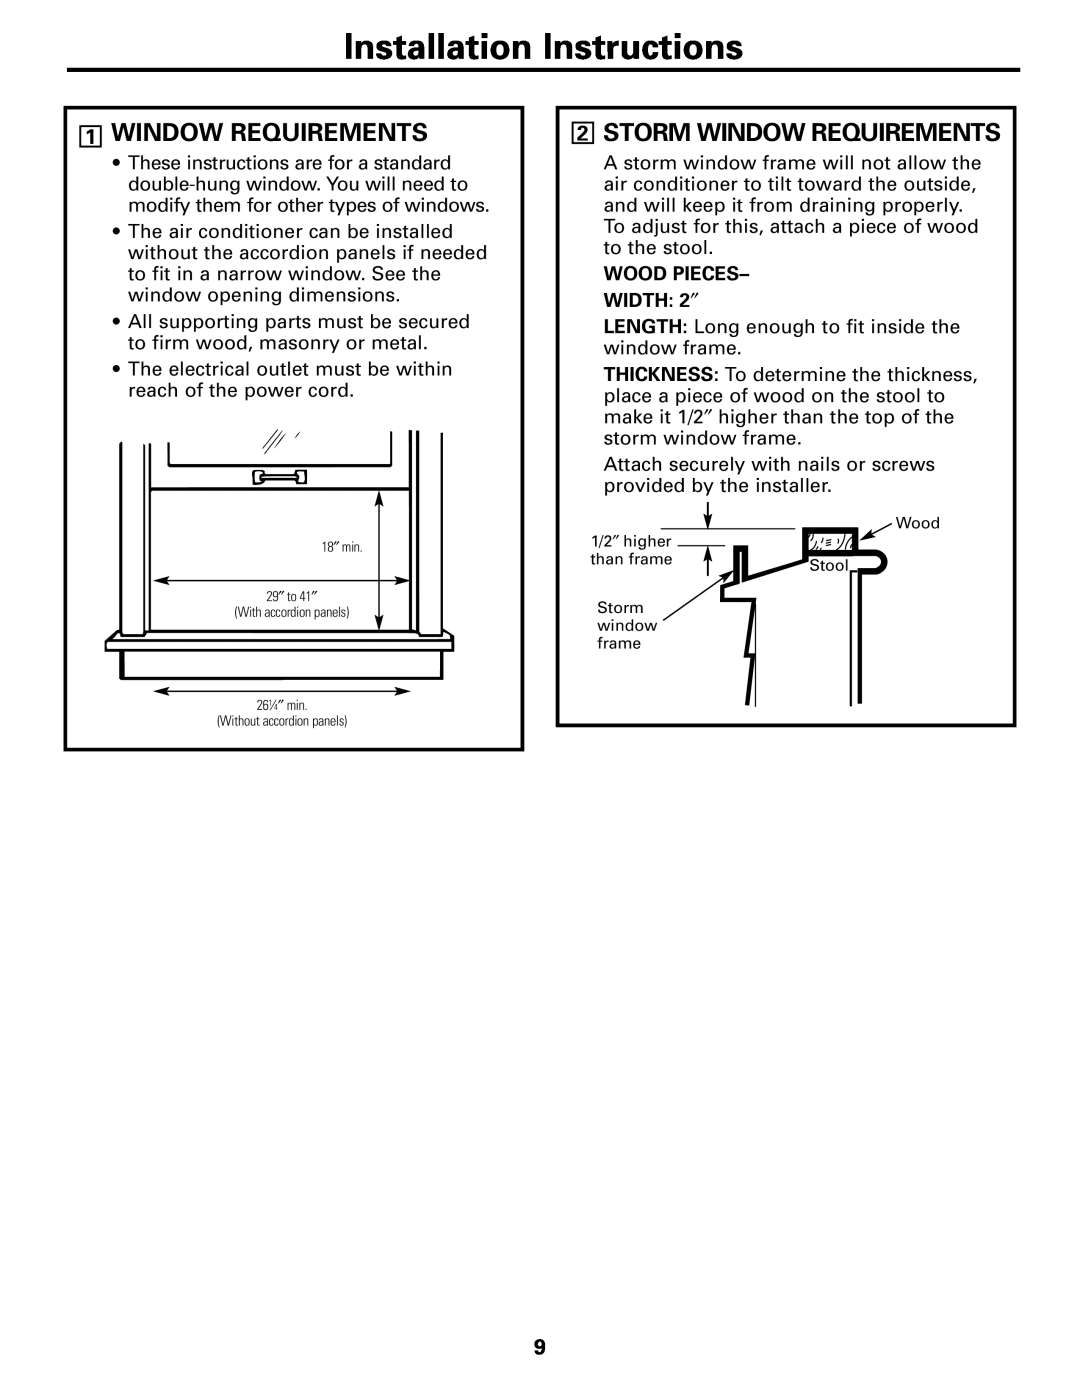 GE AGE21, AGE14, AGE18 1WINDOW REQUIREMENTS, 2STORM WINDOW REQUIREMENTS, Installation Instructions, WOOD PIECES- WIDTH 2″ 